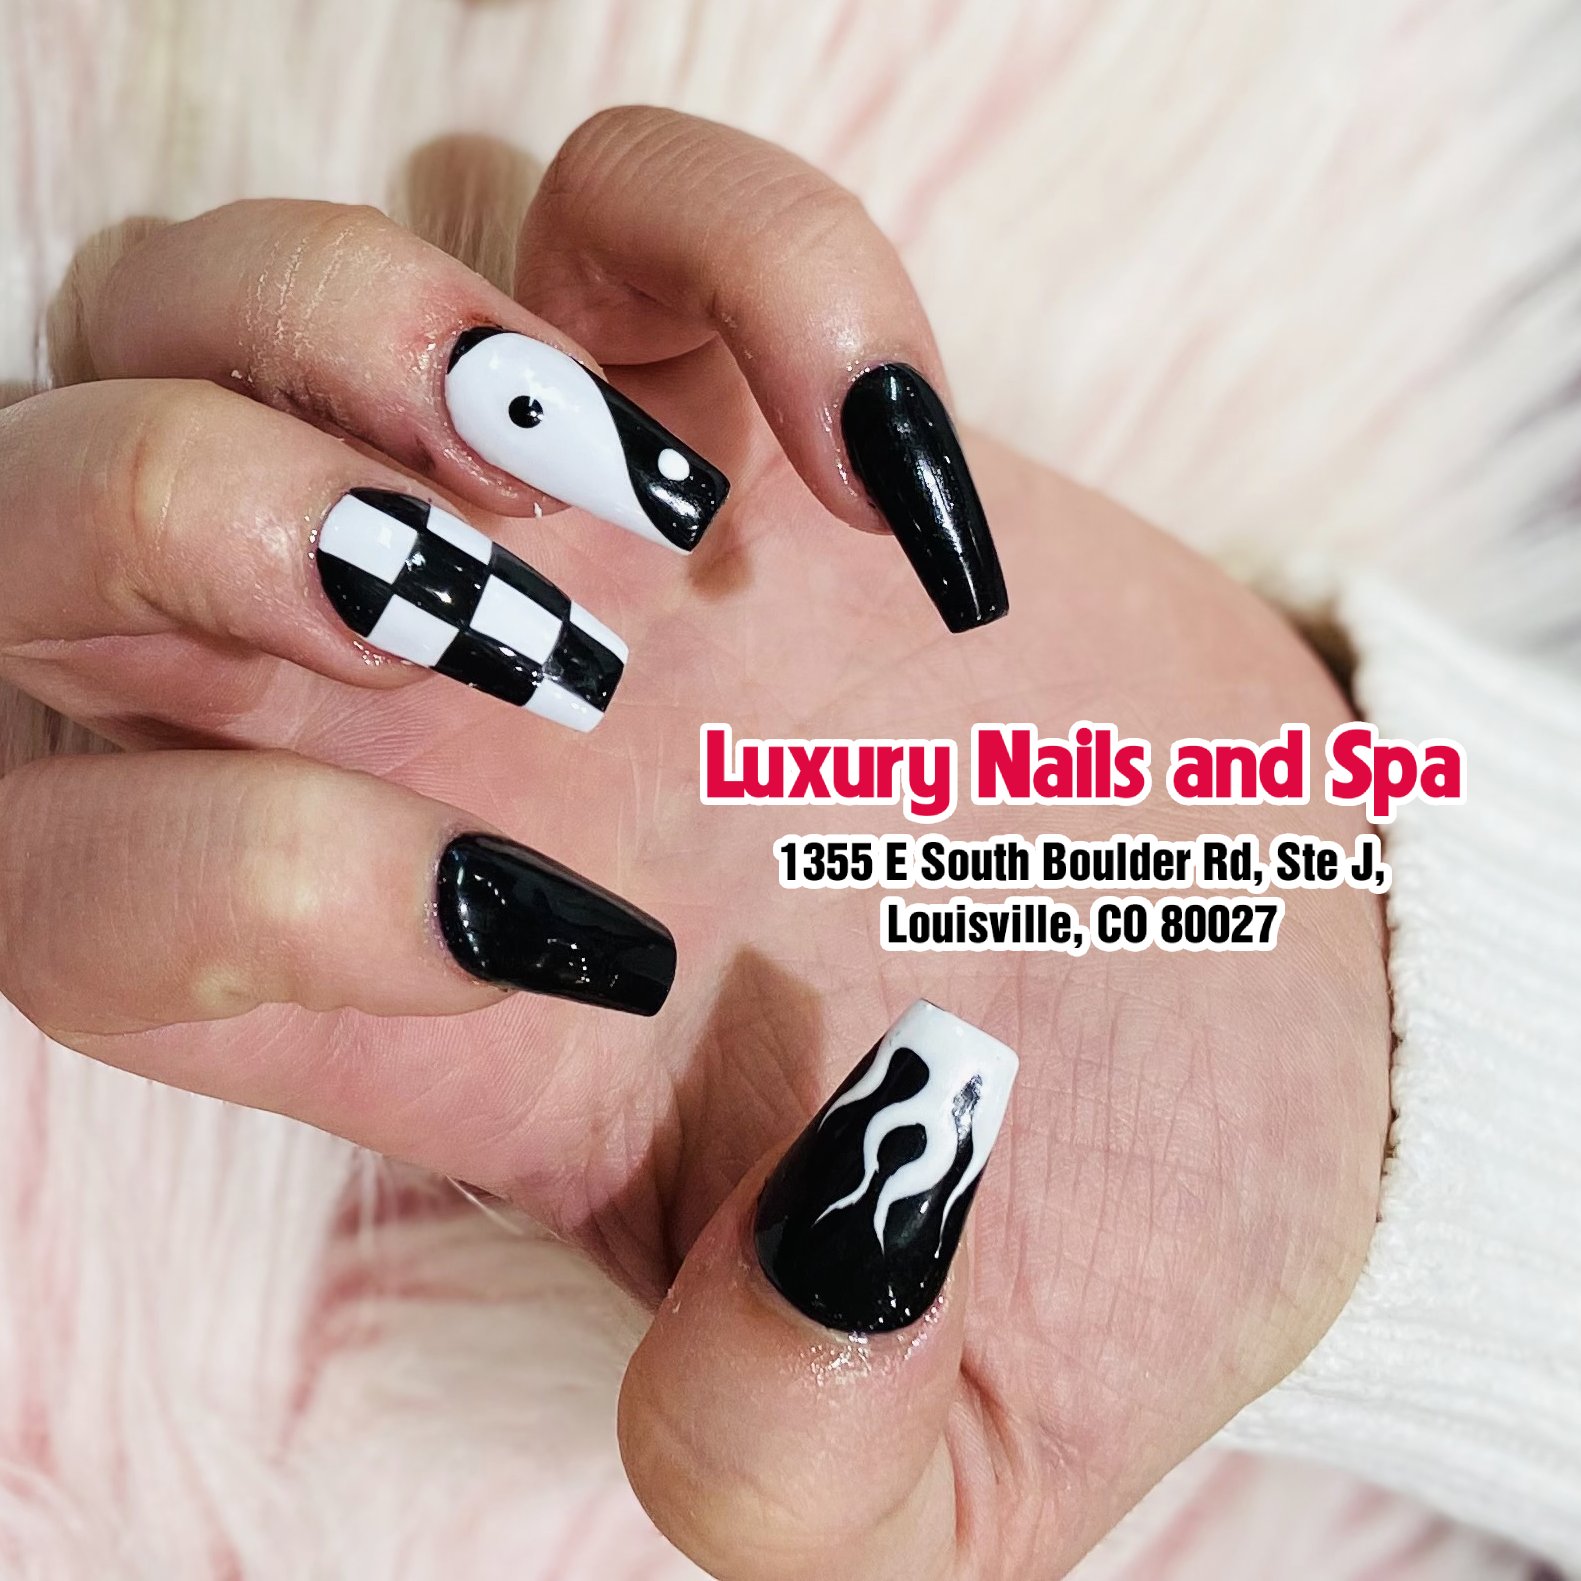 Luxury Nails and Spa in Louisville, CO 80027